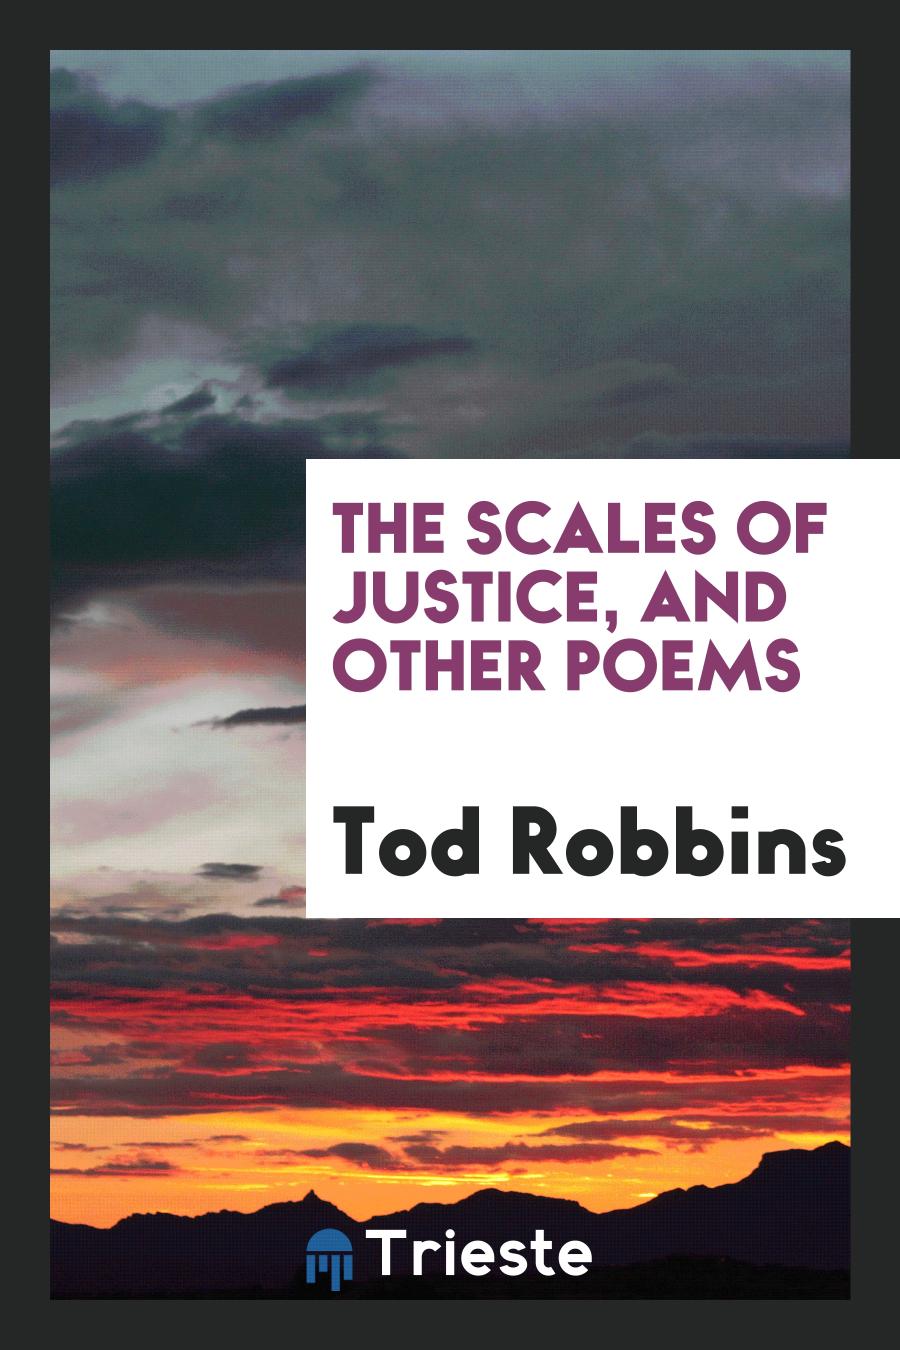 The scales of justice, and other poems